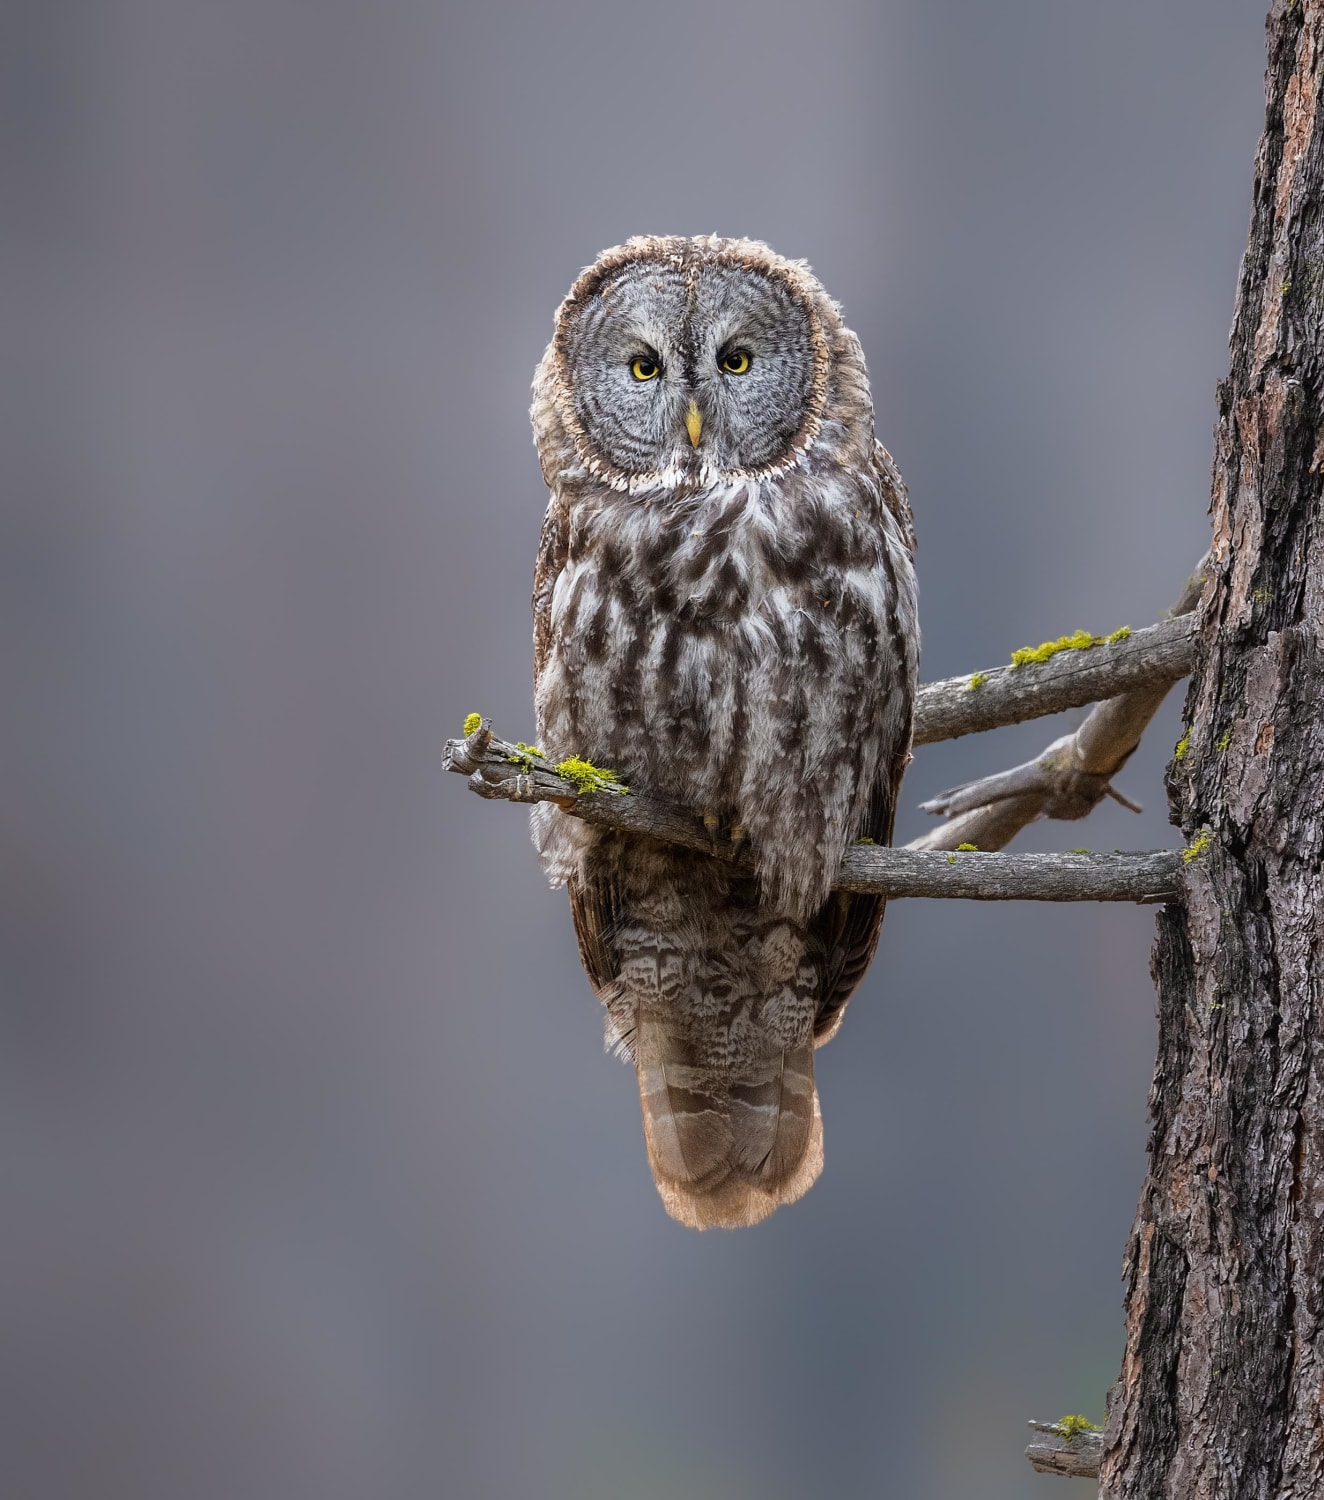 Met a beautiful Great Gray Owl while camping in Yosemite National Park!